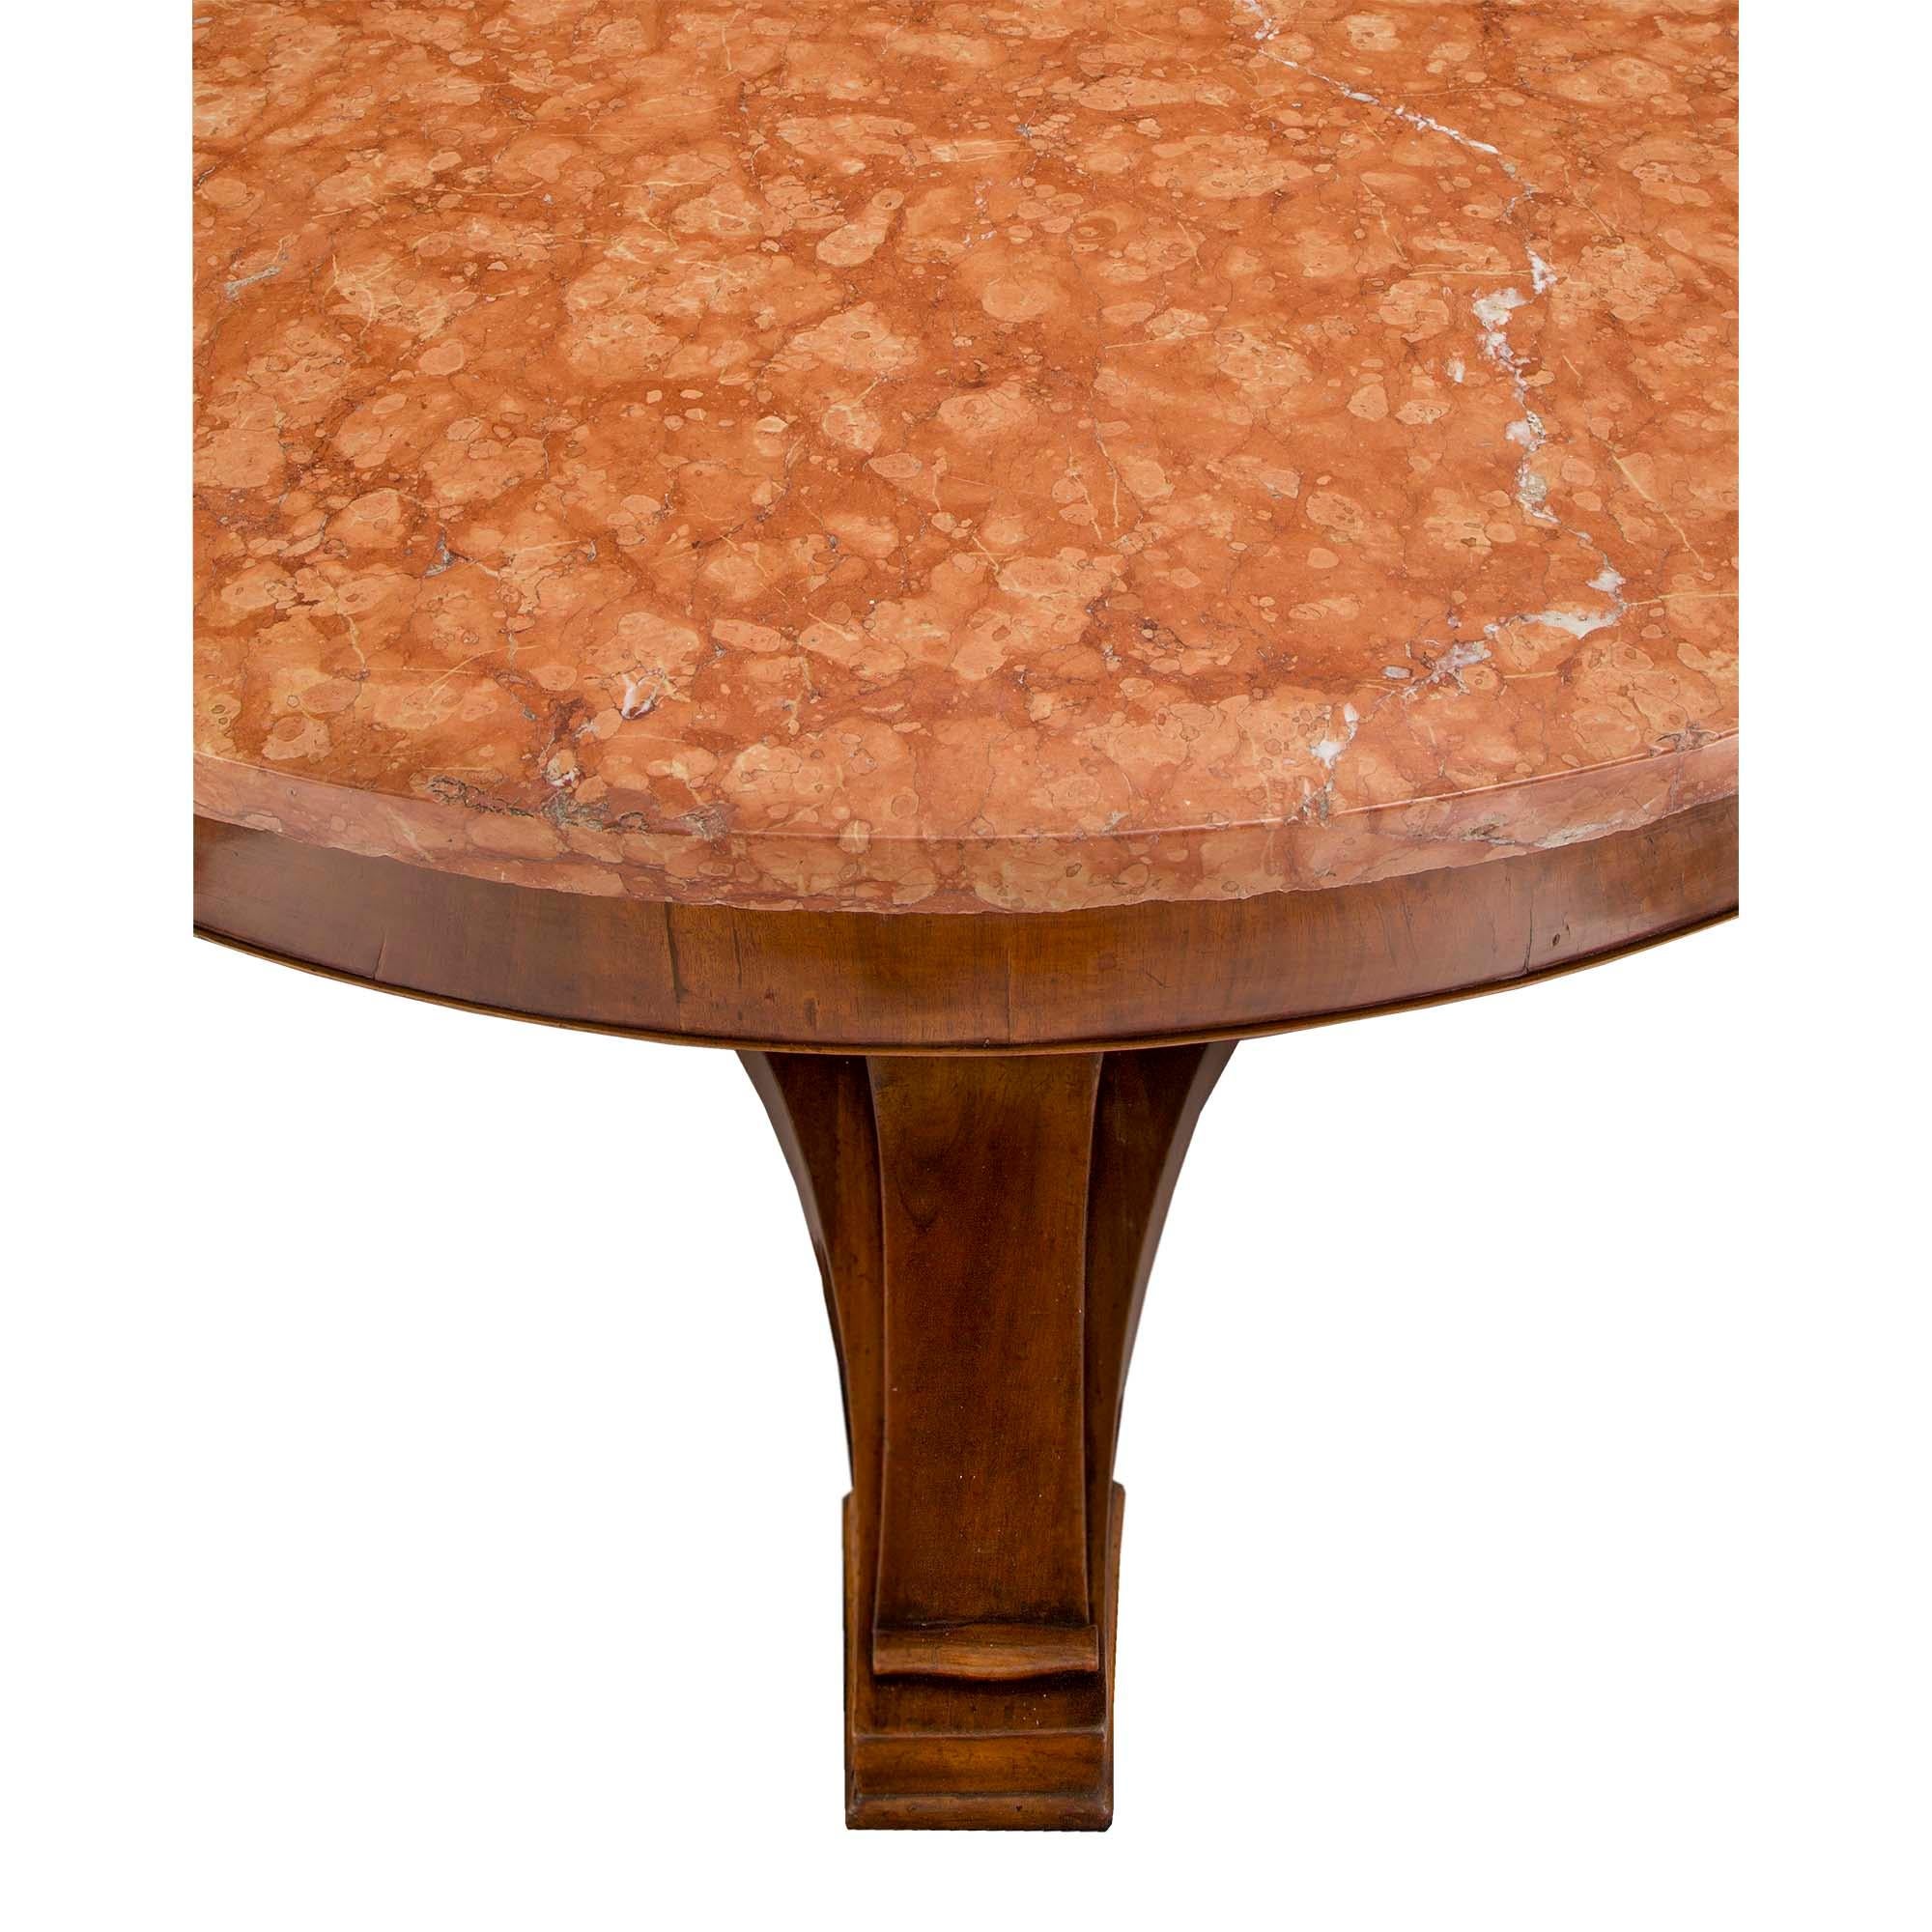 Italian 18th Century Walnut and Marble Tuscan Center Table In Good Condition For Sale In West Palm Beach, FL